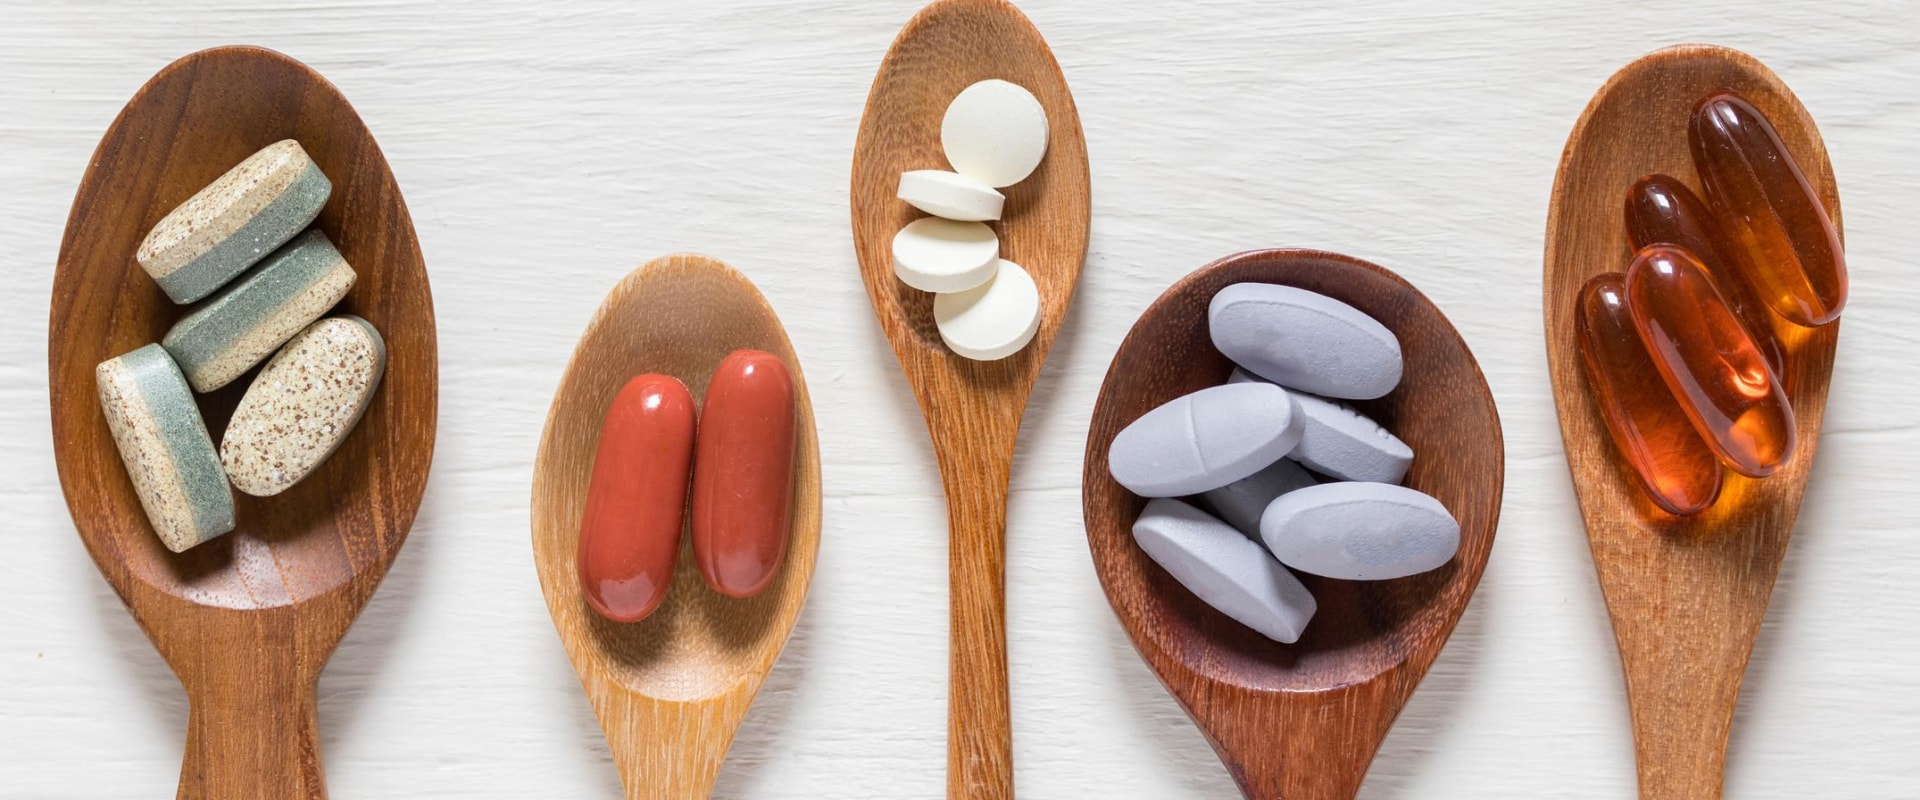 The Most Common Types of Nutritional Supplement Ingredients: An Expert's Guide